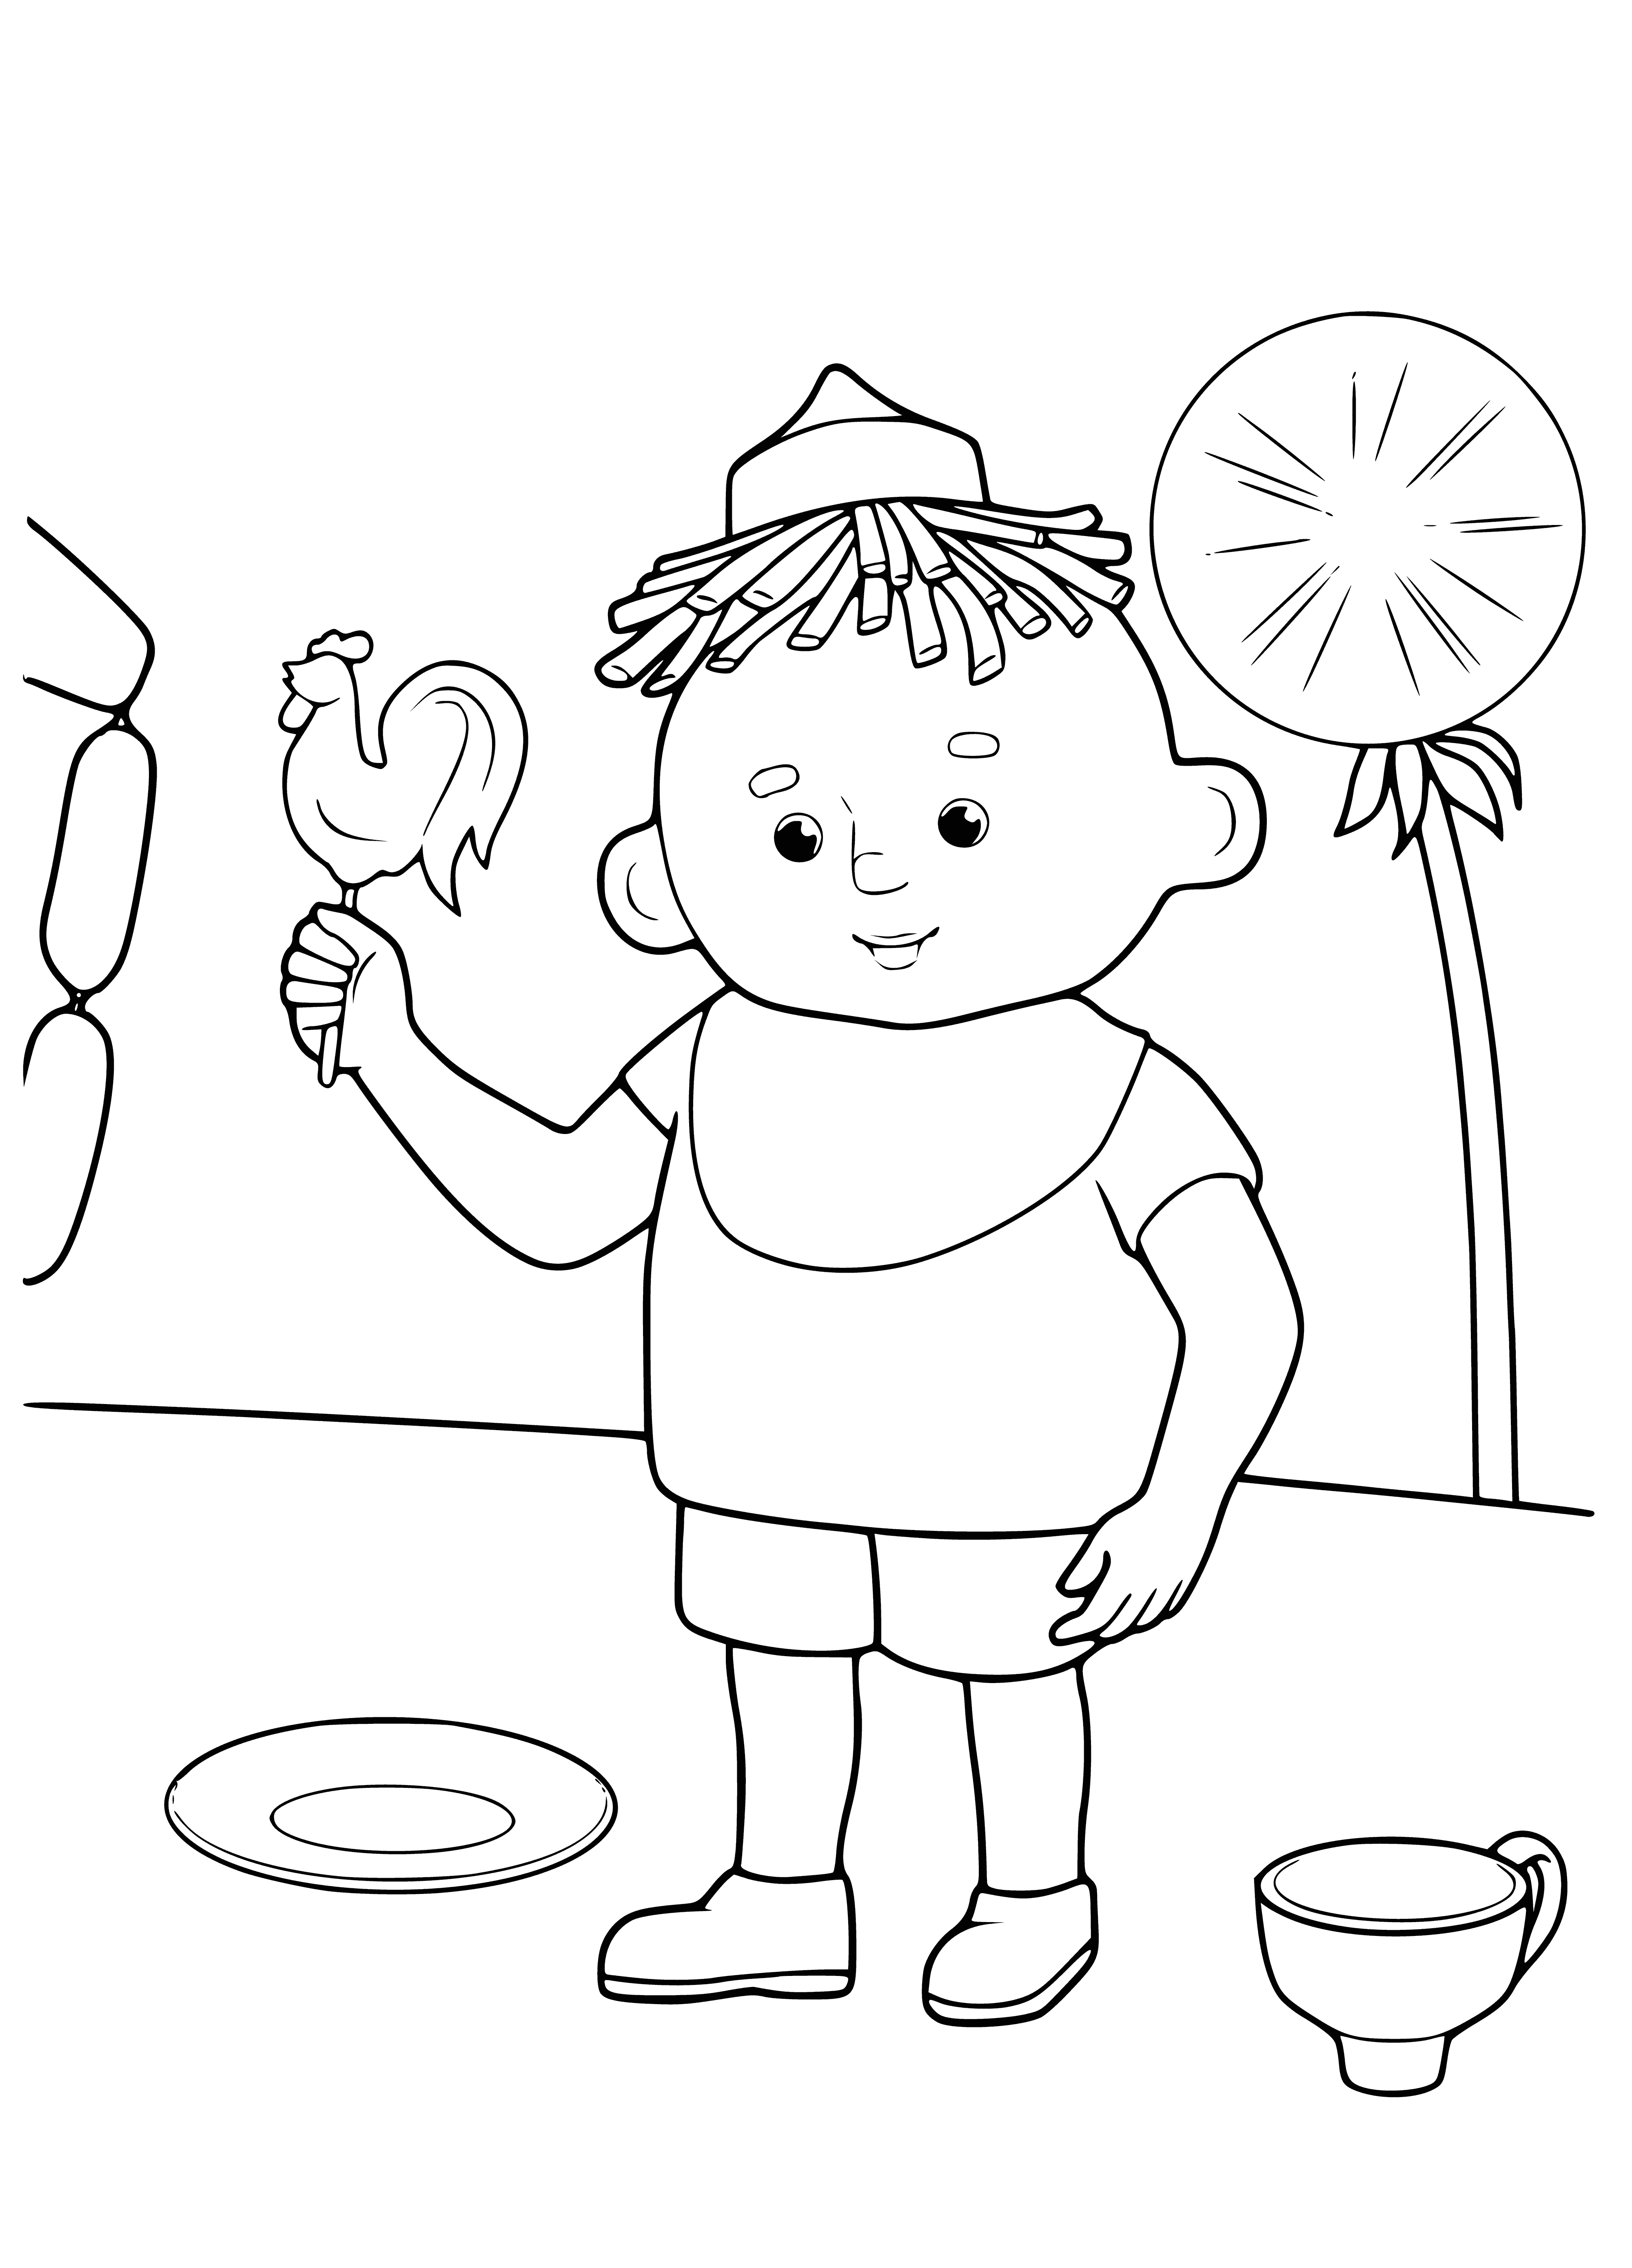 coloring page: Boy sits on leaf w/brown bird, holds yellow spoon & white bottle, smiles on sky-blue bg w/ white clouds. Wears white shirt & brown shorts.